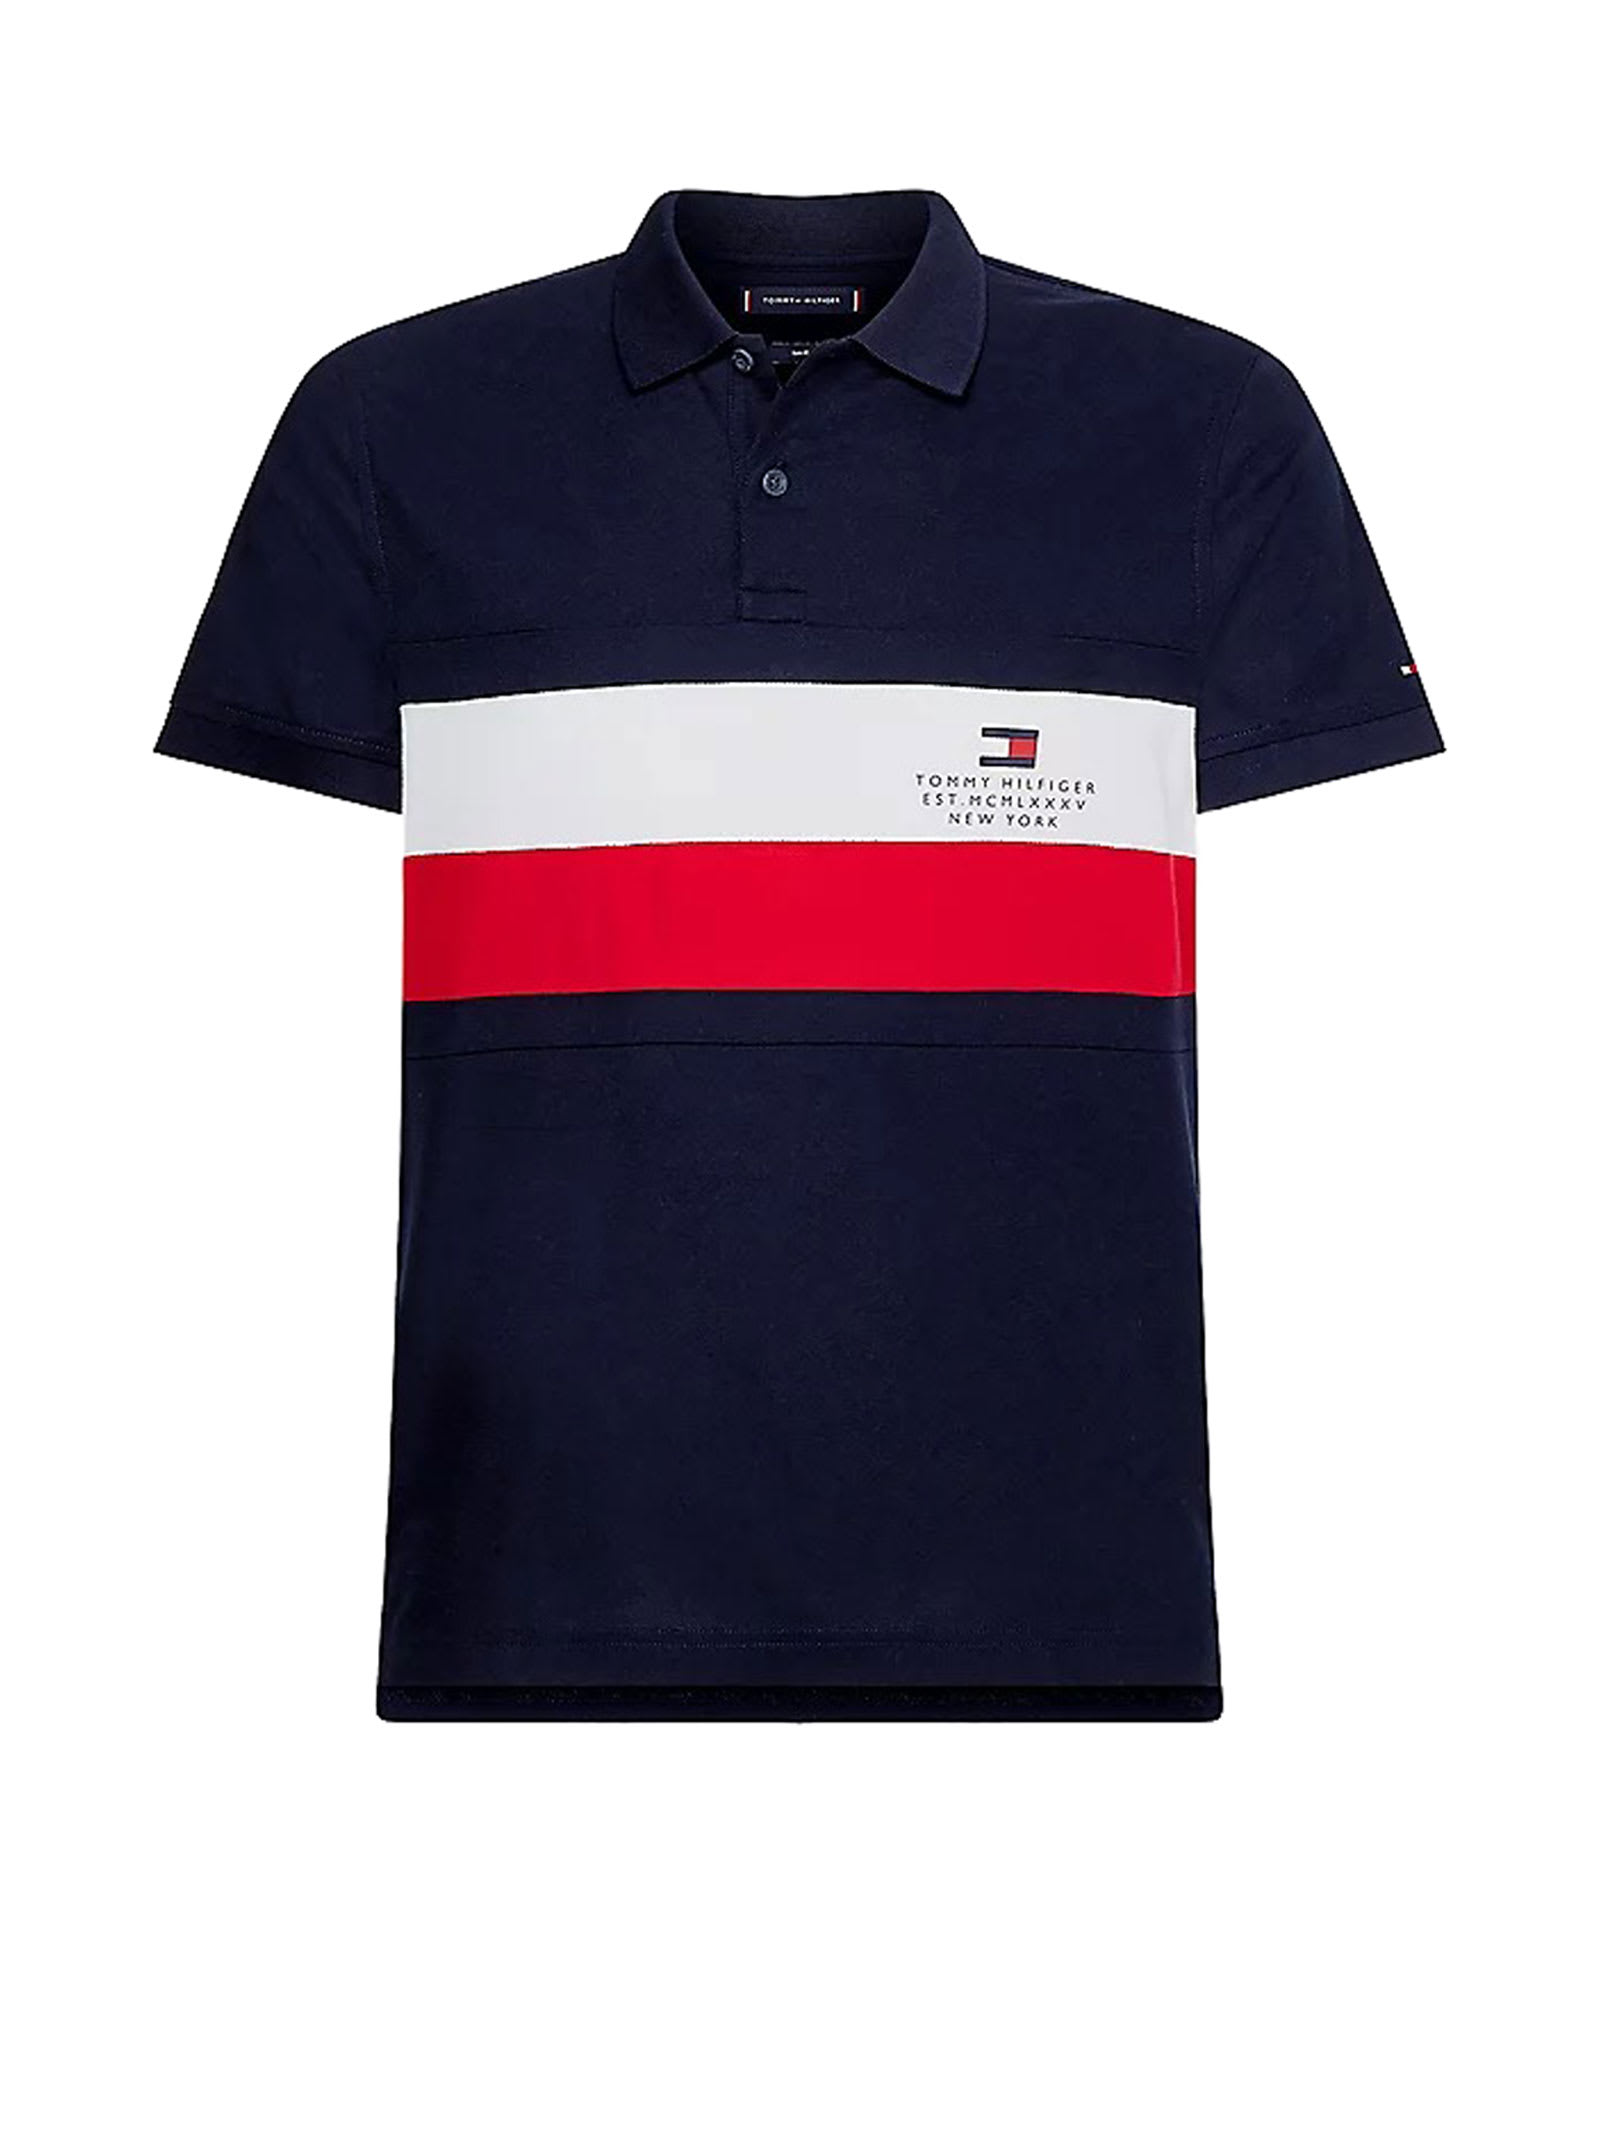 Tommy Hilfiger polo shirt in blue cotton